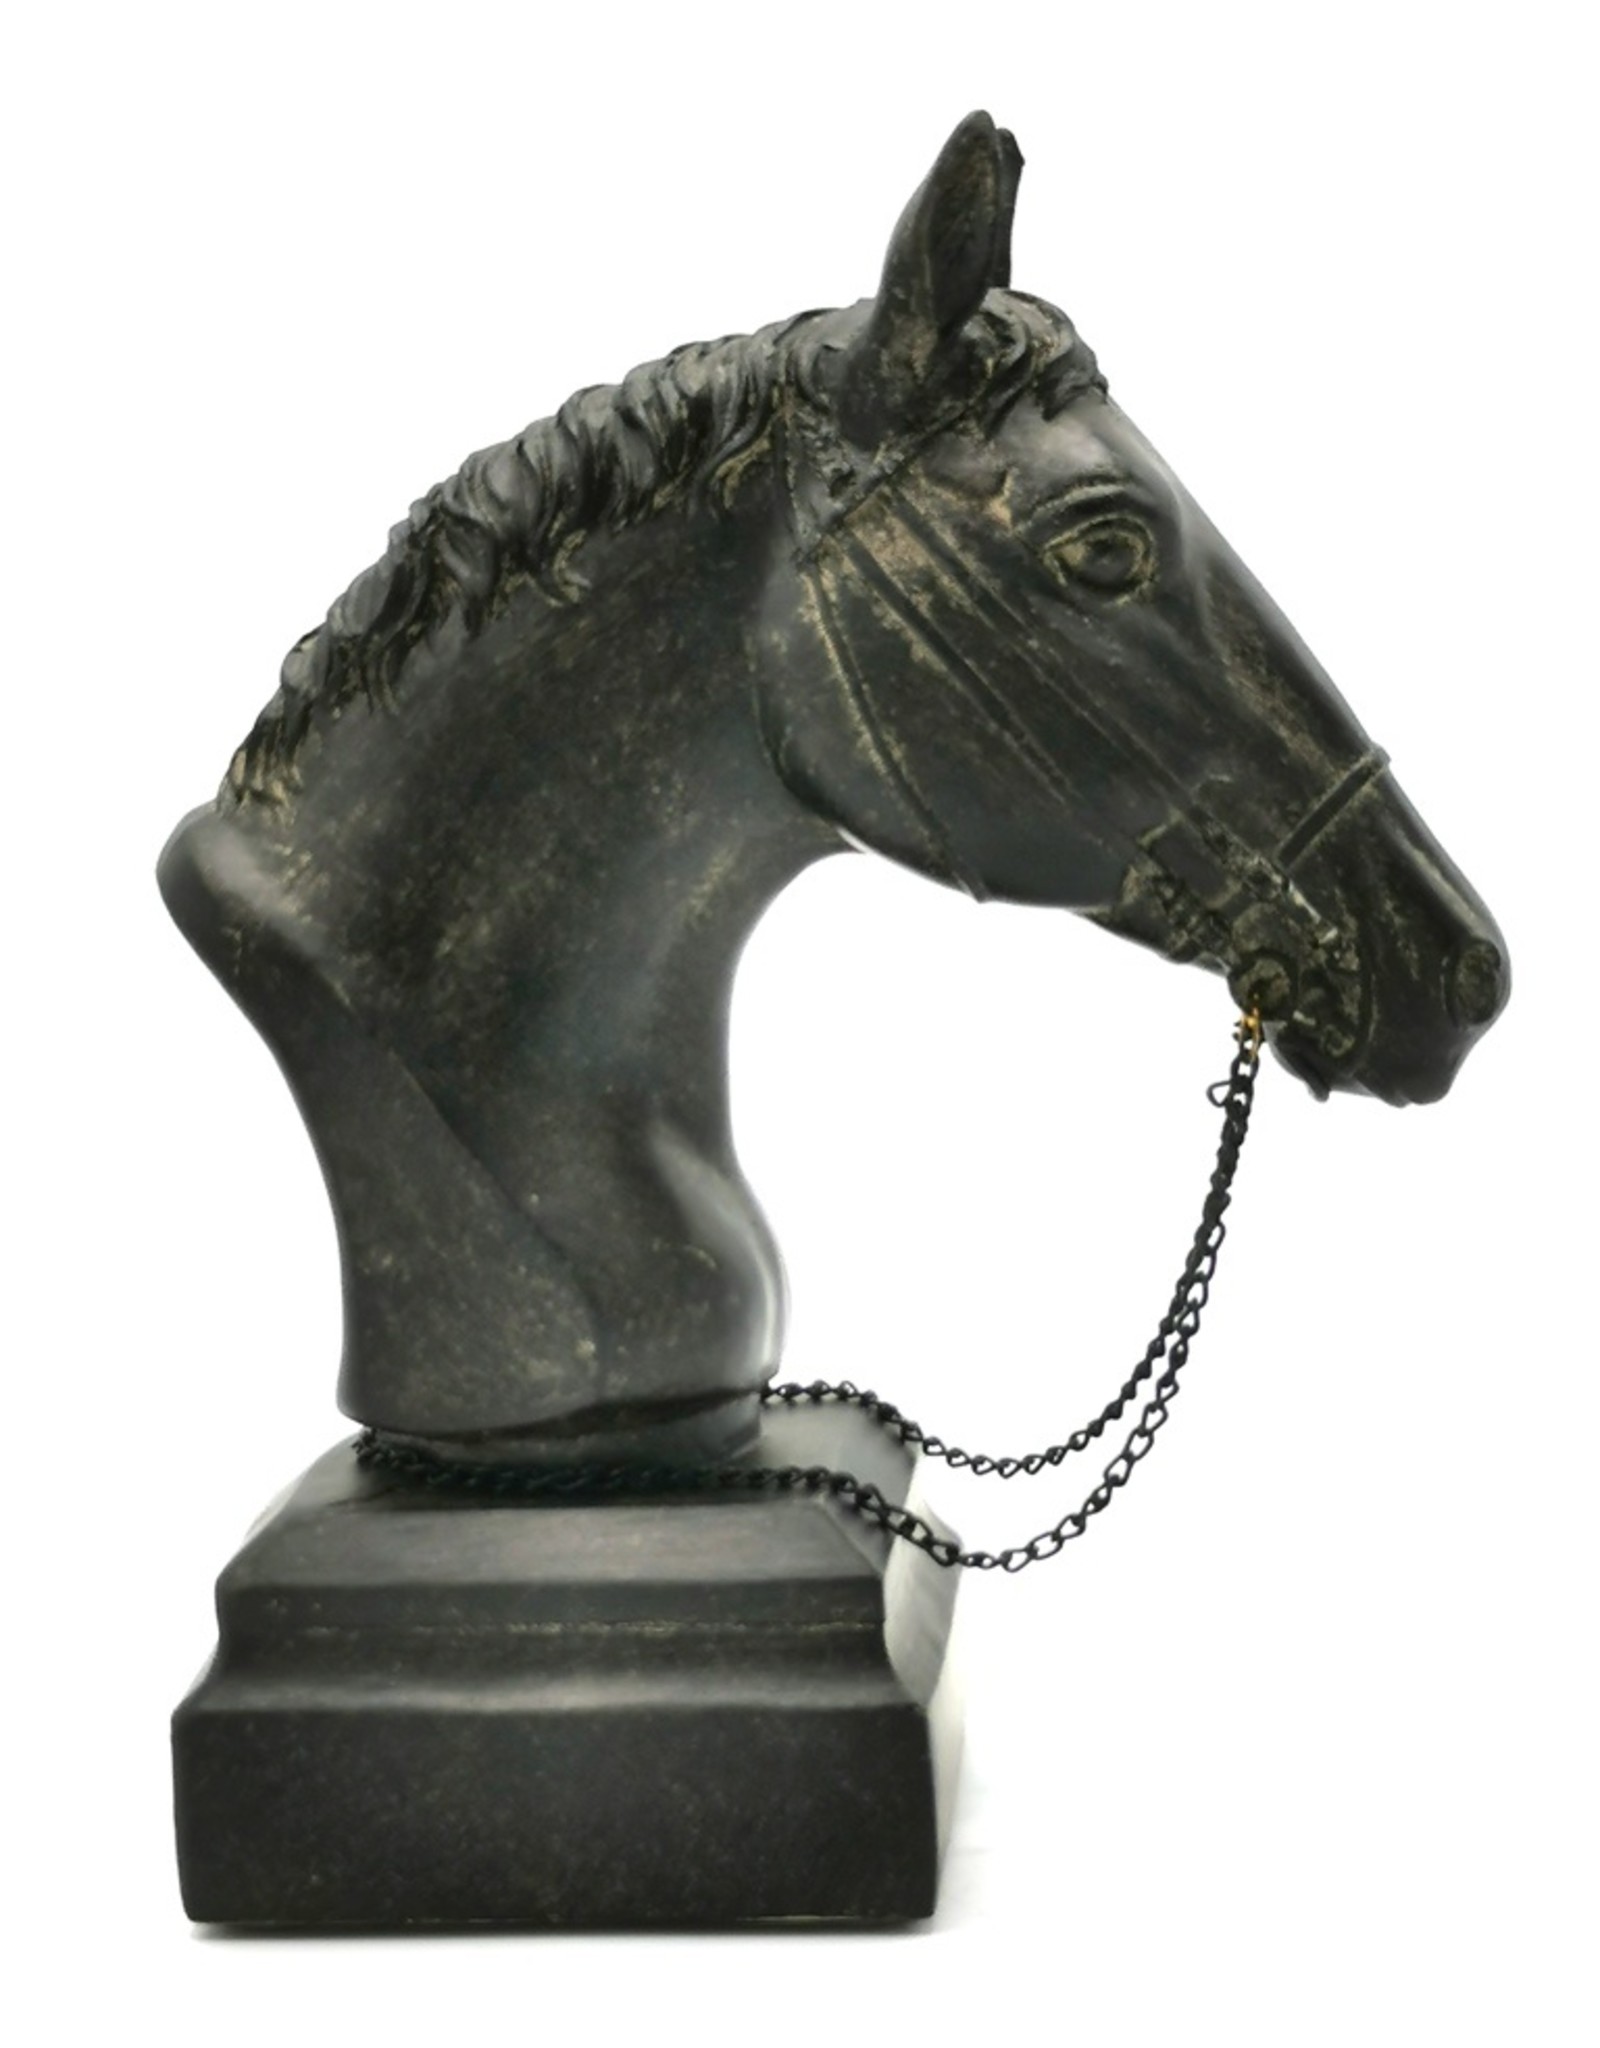 Trukado Giftware Figurines Collectables - Horse Bust Antique look 20cm